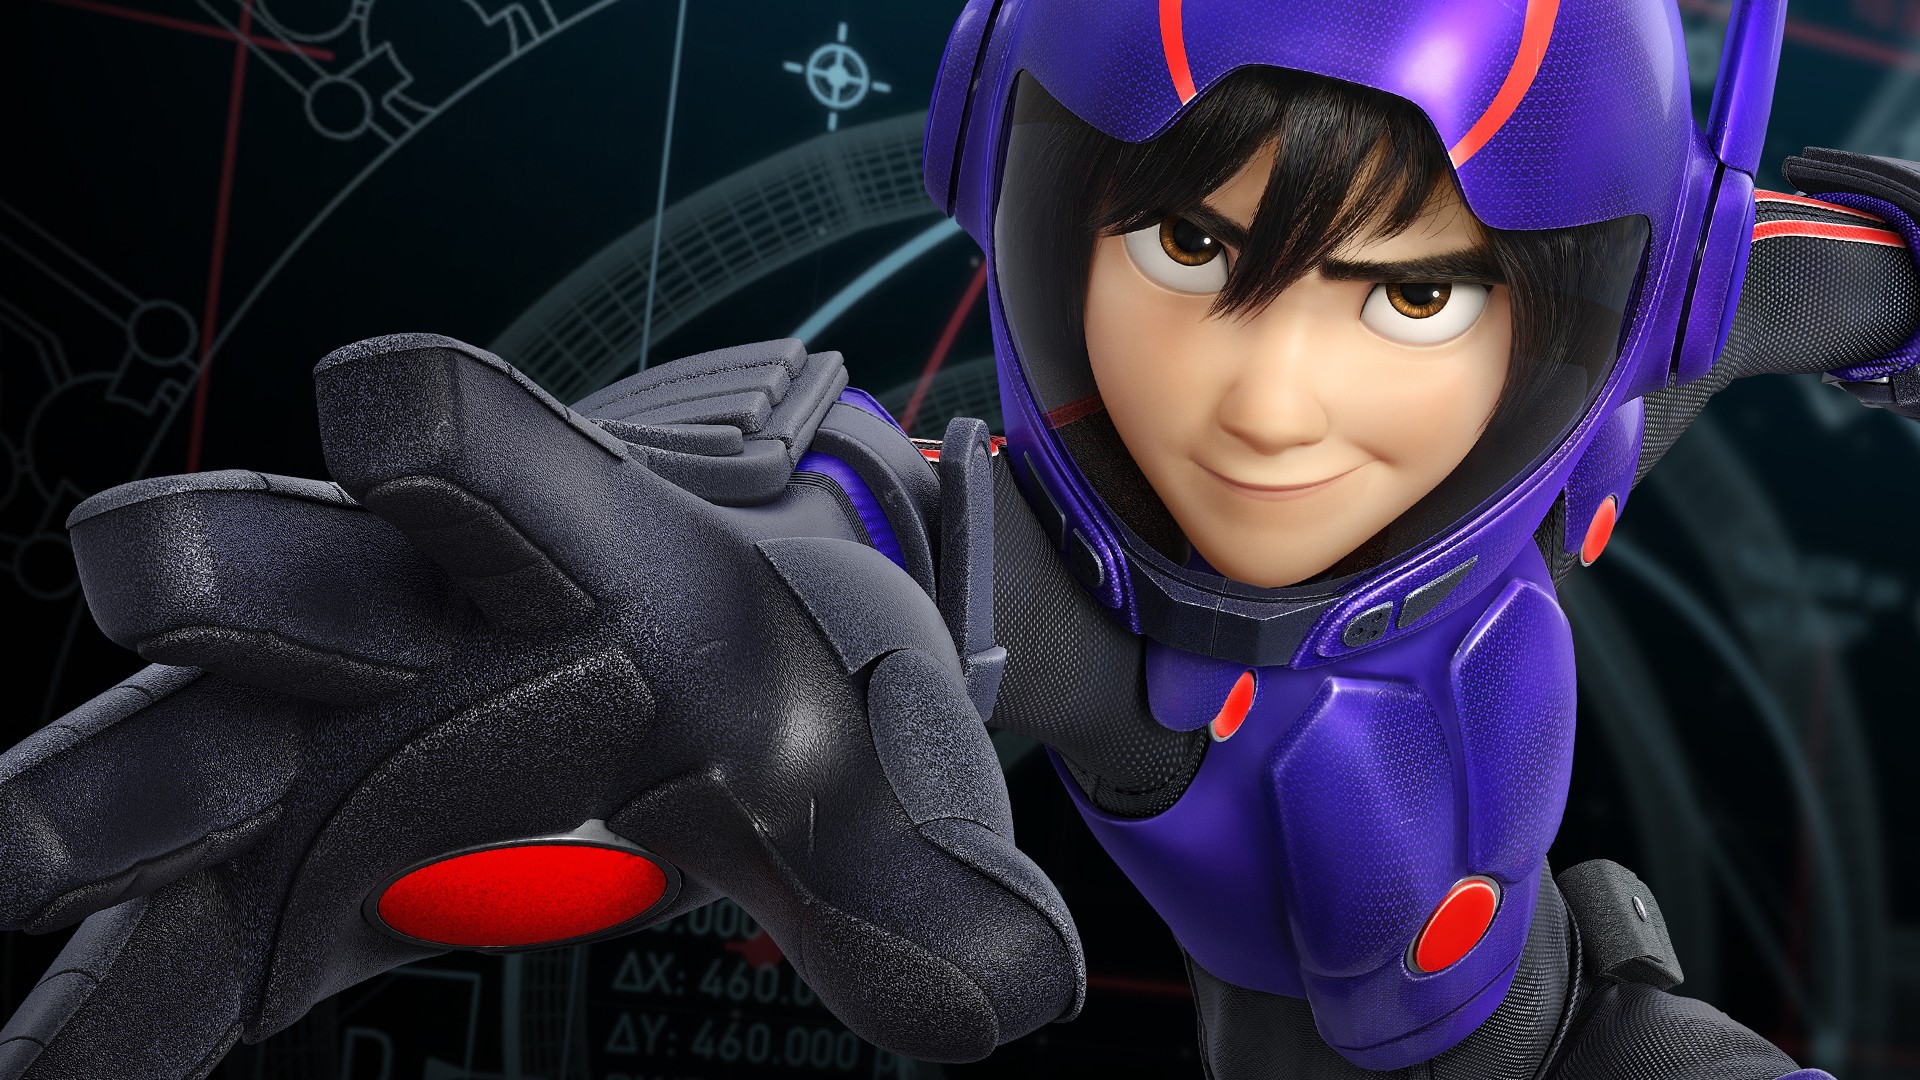 90 Big Hero 6 HD Wallpapers and Backgrounds